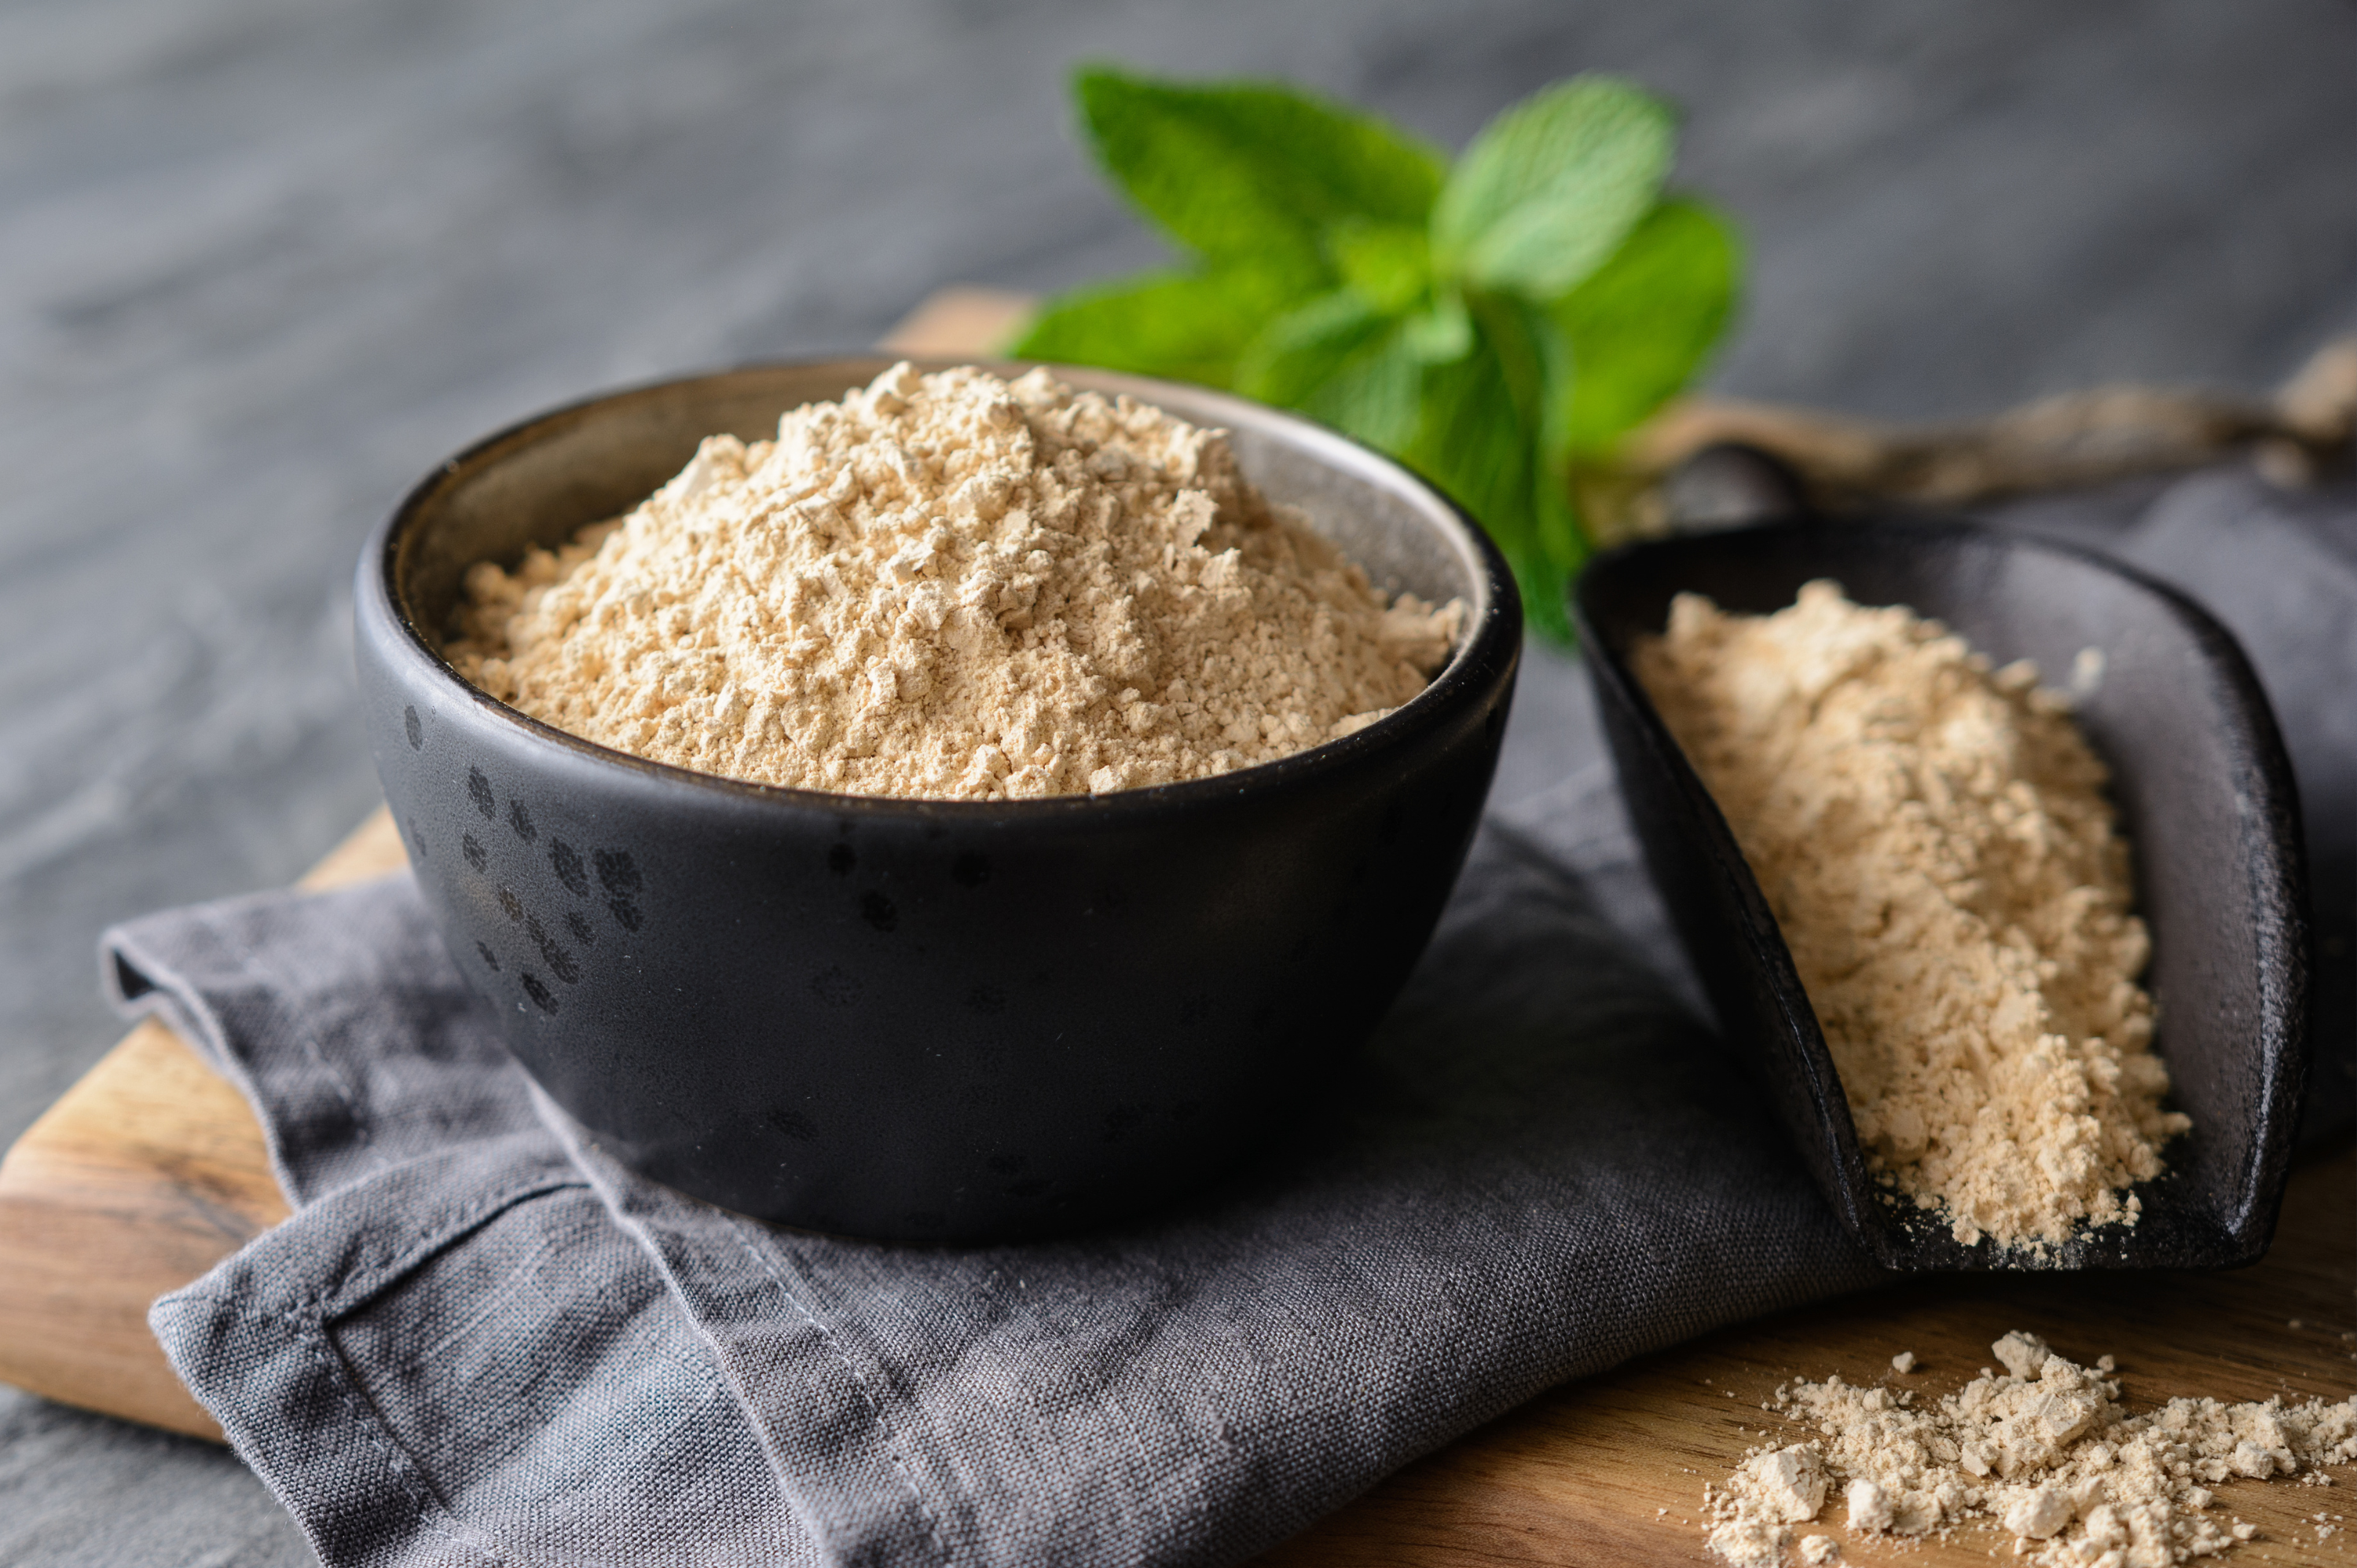  Maca root benefits, uses, and history